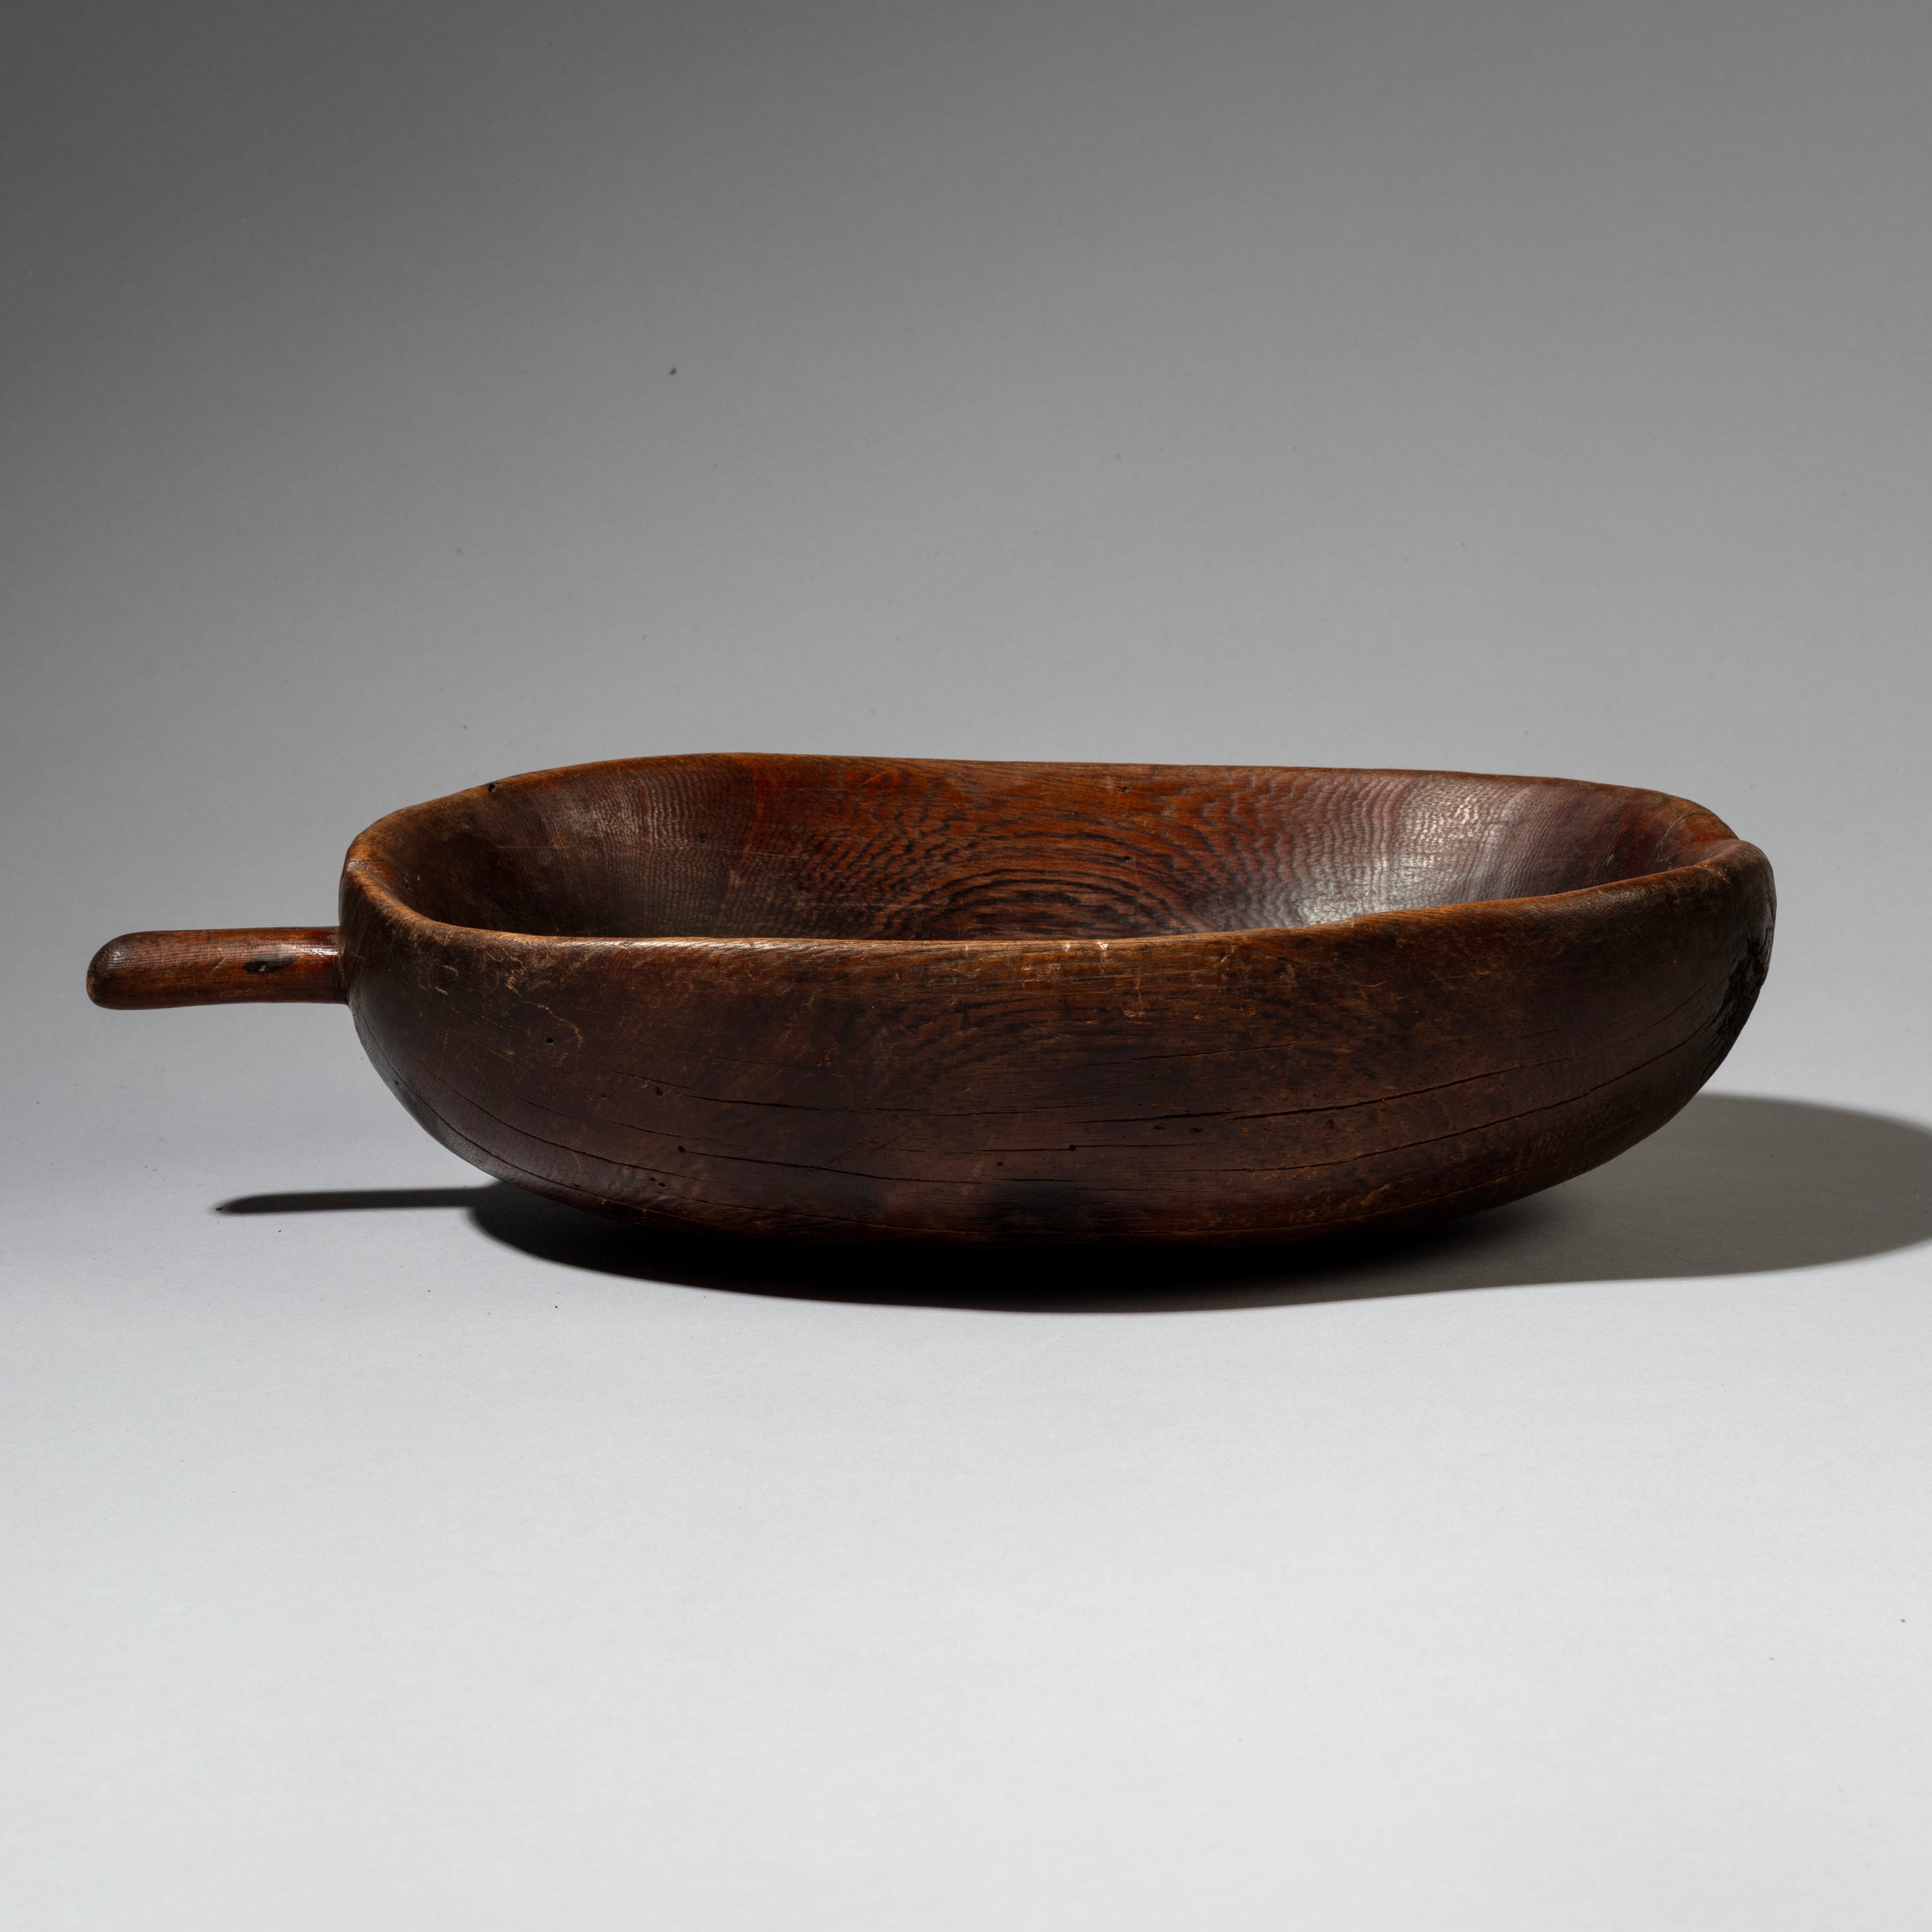 A WELL PATINATED BOWL WITH INDIGENOUS REPAIR, FROM TUTSI TRIBE OF RWANDA ( No 2049)